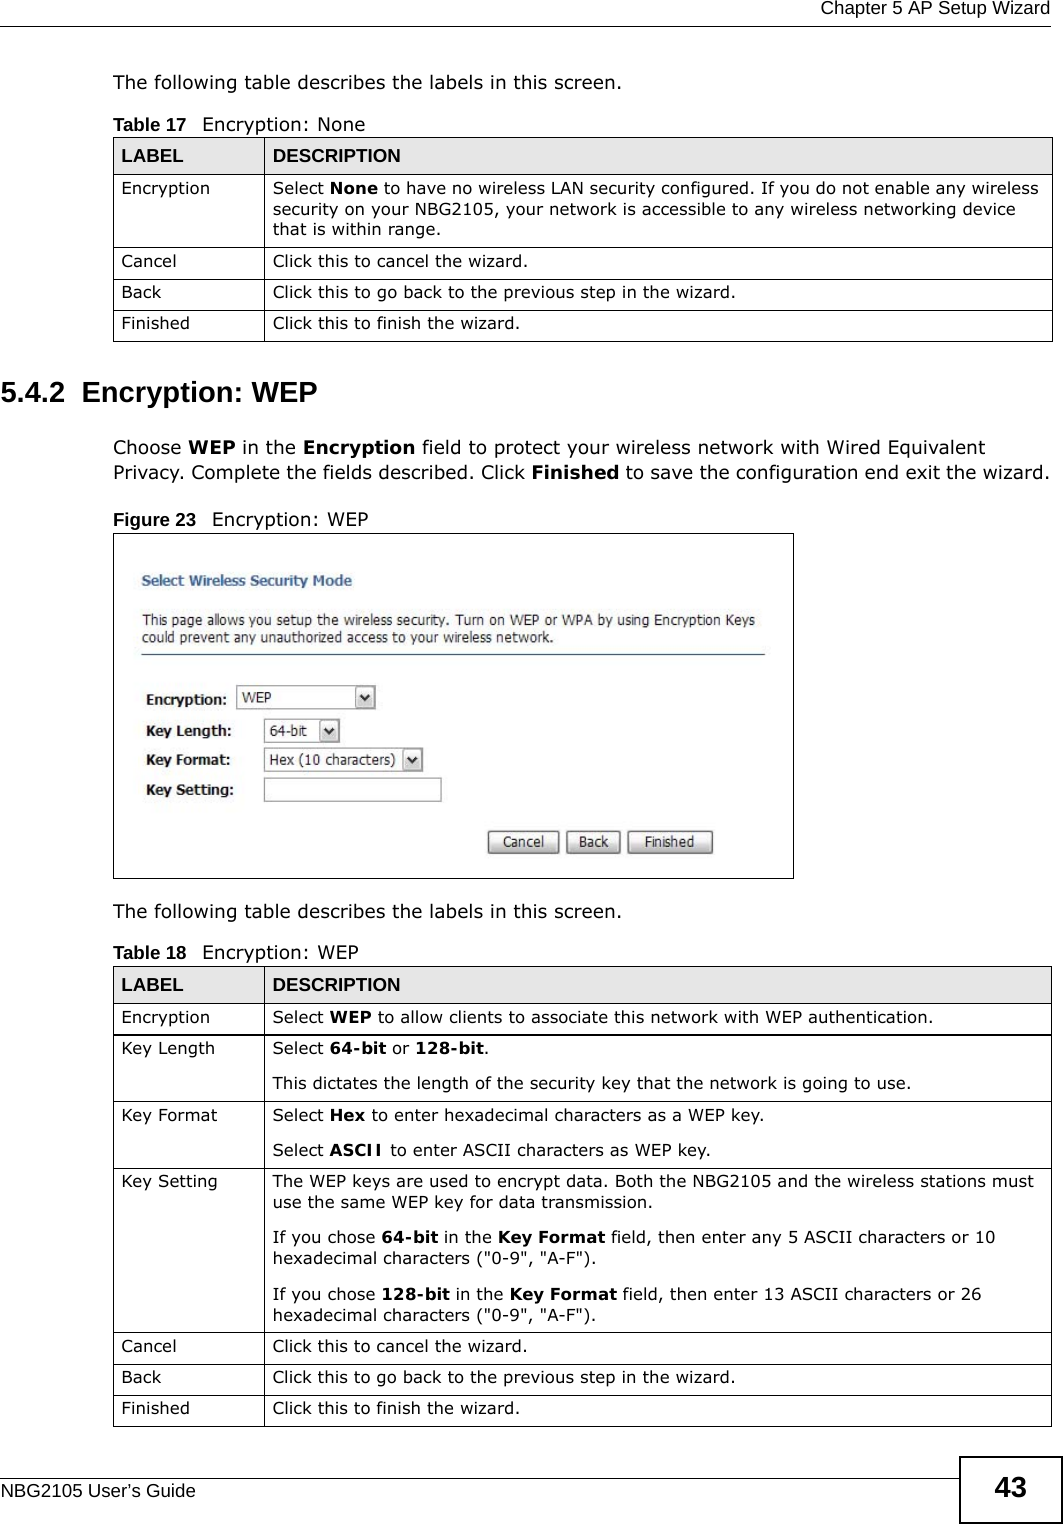  Chapter 5 AP Setup WizardNBG2105 User’s Guide 43The following table describes the labels in this screen.5.4.2  Encryption: WEPChoose WEP in the Encryption field to protect your wireless network with Wired Equivalent Privacy. Complete the fields described. Click Finished to save the configuration end exit the wizard.Figure 23   Encryption: WEP The following table describes the labels in this screen. Table 17   Encryption: NoneLABEL DESCRIPTIONEncryption Select None to have no wireless LAN security configured. If you do not enable any wireless security on your NBG2105, your network is accessible to any wireless networking device that is within range. Cancel Click this to cancel the wizard.Back Click this to go back to the previous step in the wizard.Finished Click this to finish the wizard.Table 18   Encryption: WEPLABEL DESCRIPTIONEncryption Select WEP to allow clients to associate this network with WEP authentication.Key Length Select 64-bit or 128-bit.This dictates the length of the security key that the network is going to use.Key Format Select Hex to enter hexadecimal characters as a WEP key. Select ASCII to enter ASCII characters as WEP key. Key Setting The WEP keys are used to encrypt data. Both the NBG2105 and the wireless stations must use the same WEP key for data transmission.If you chose 64-bit in the Key Format field, then enter any 5 ASCII characters or 10 hexadecimal characters (&quot;0-9&quot;, &quot;A-F&quot;).If you chose 128-bit in the Key Format field, then enter 13 ASCII characters or 26 hexadecimal characters (&quot;0-9&quot;, &quot;A-F&quot;). Cancel Click this to cancel the wizard.Back Click this to go back to the previous step in the wizard.Finished Click this to finish the wizard.